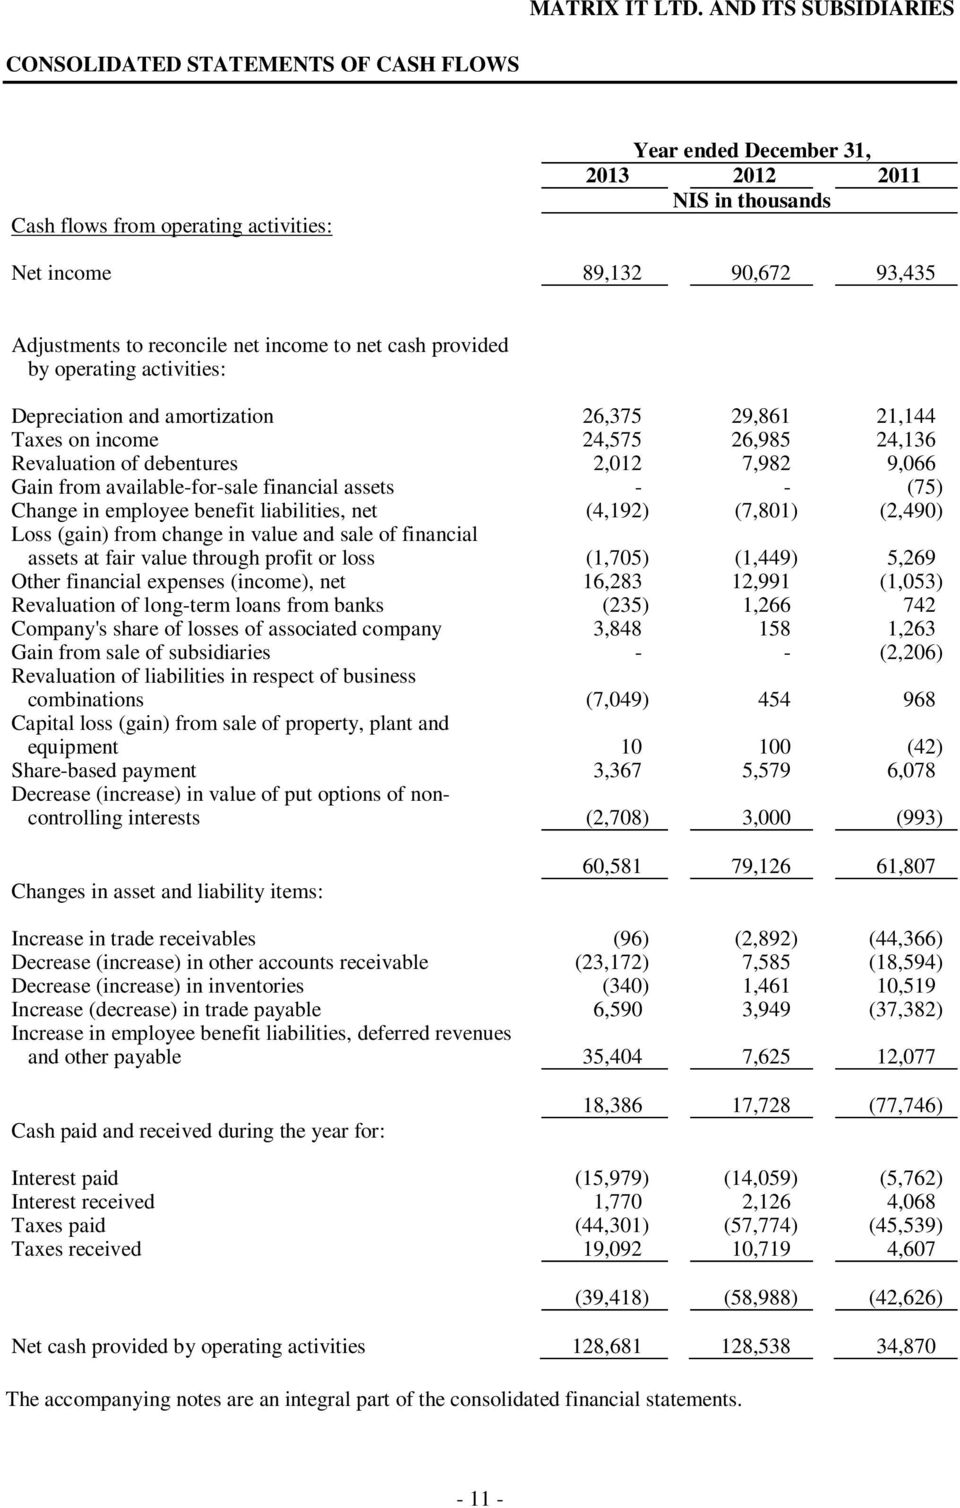 financial assets - - (75) Change in employee benefit liabilities, net (4,192) (7,801) (2,490) Loss (gain) from change in value and sale of financial assets at fair value through profit or loss